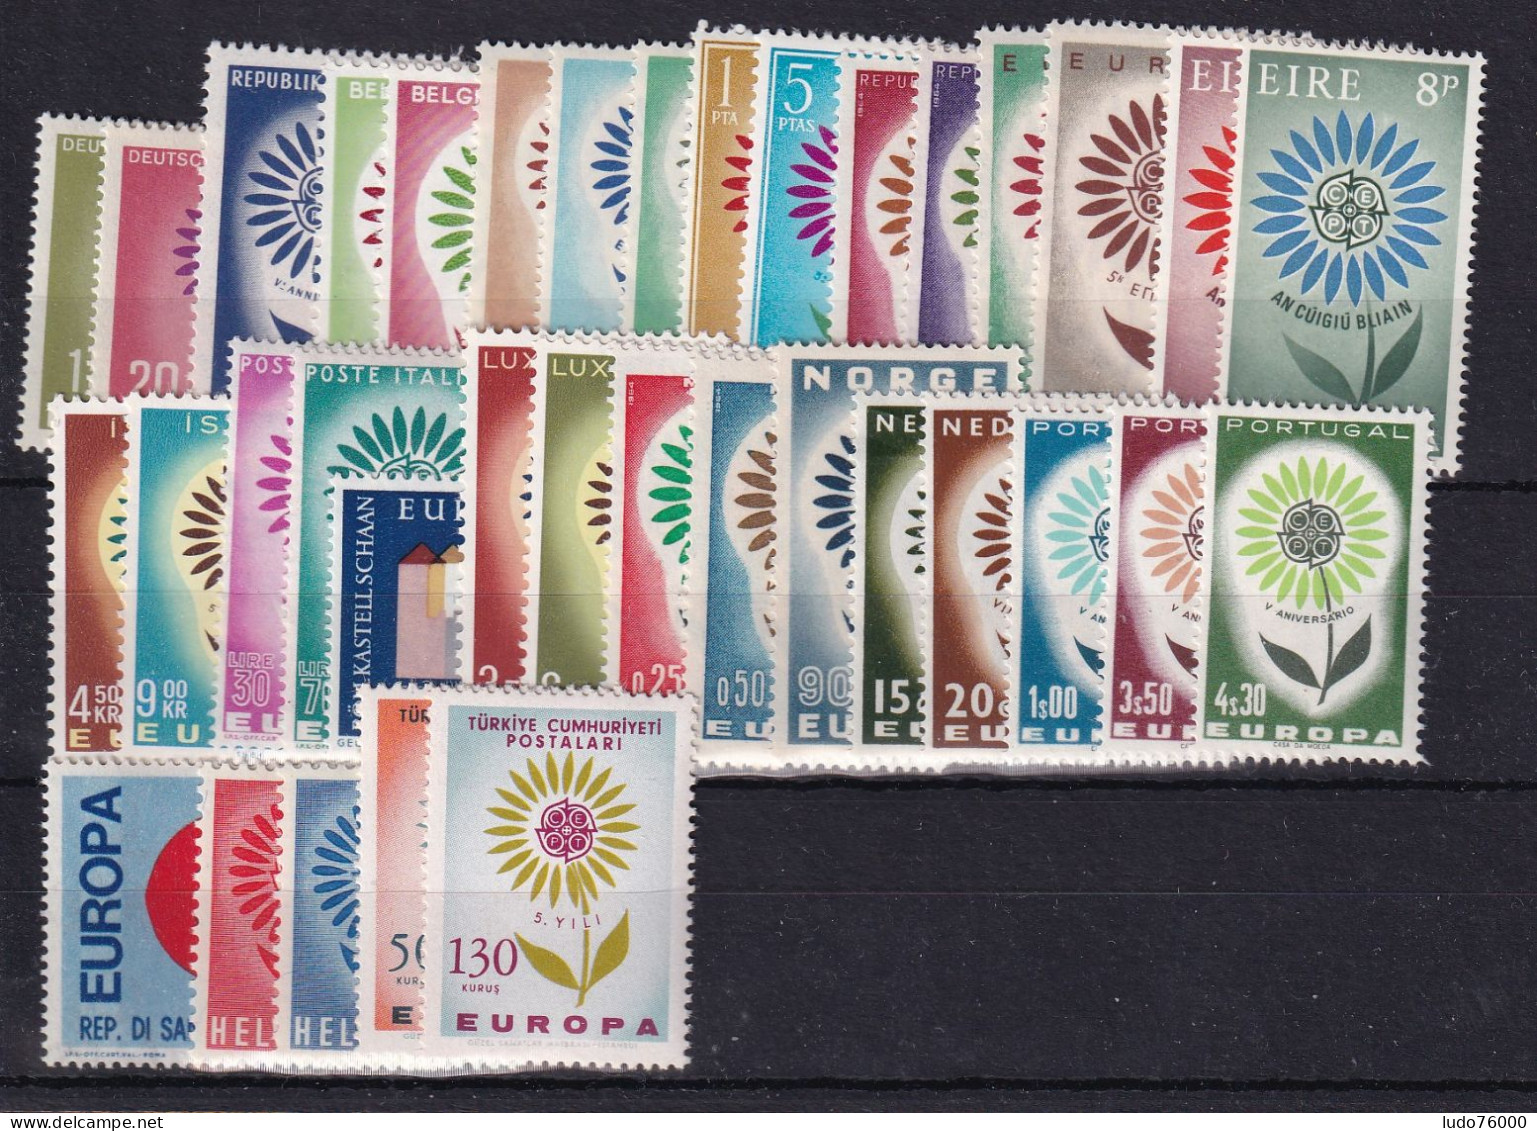 D 787 / EUROPA  ANNEE 1964 COMPLETE NEUF* COTE 117€ - 1964